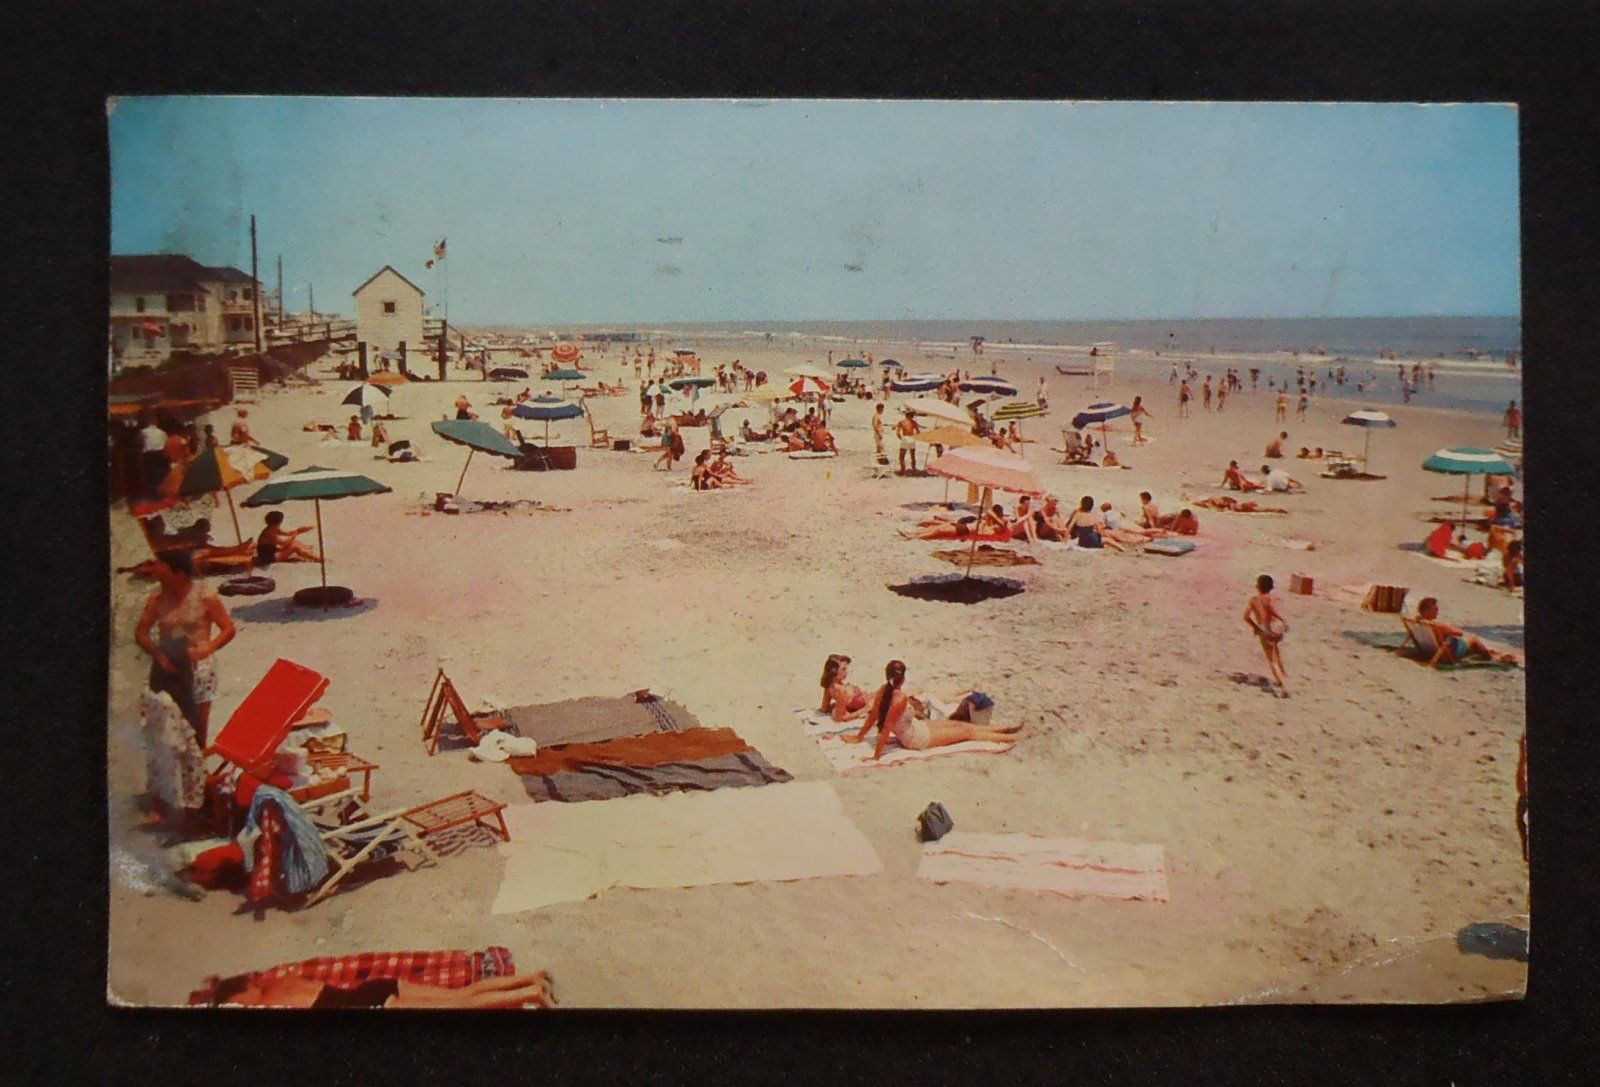 1960 Beach and Surf Bathing Stone Harbor NJ Cape May Co Postcard New